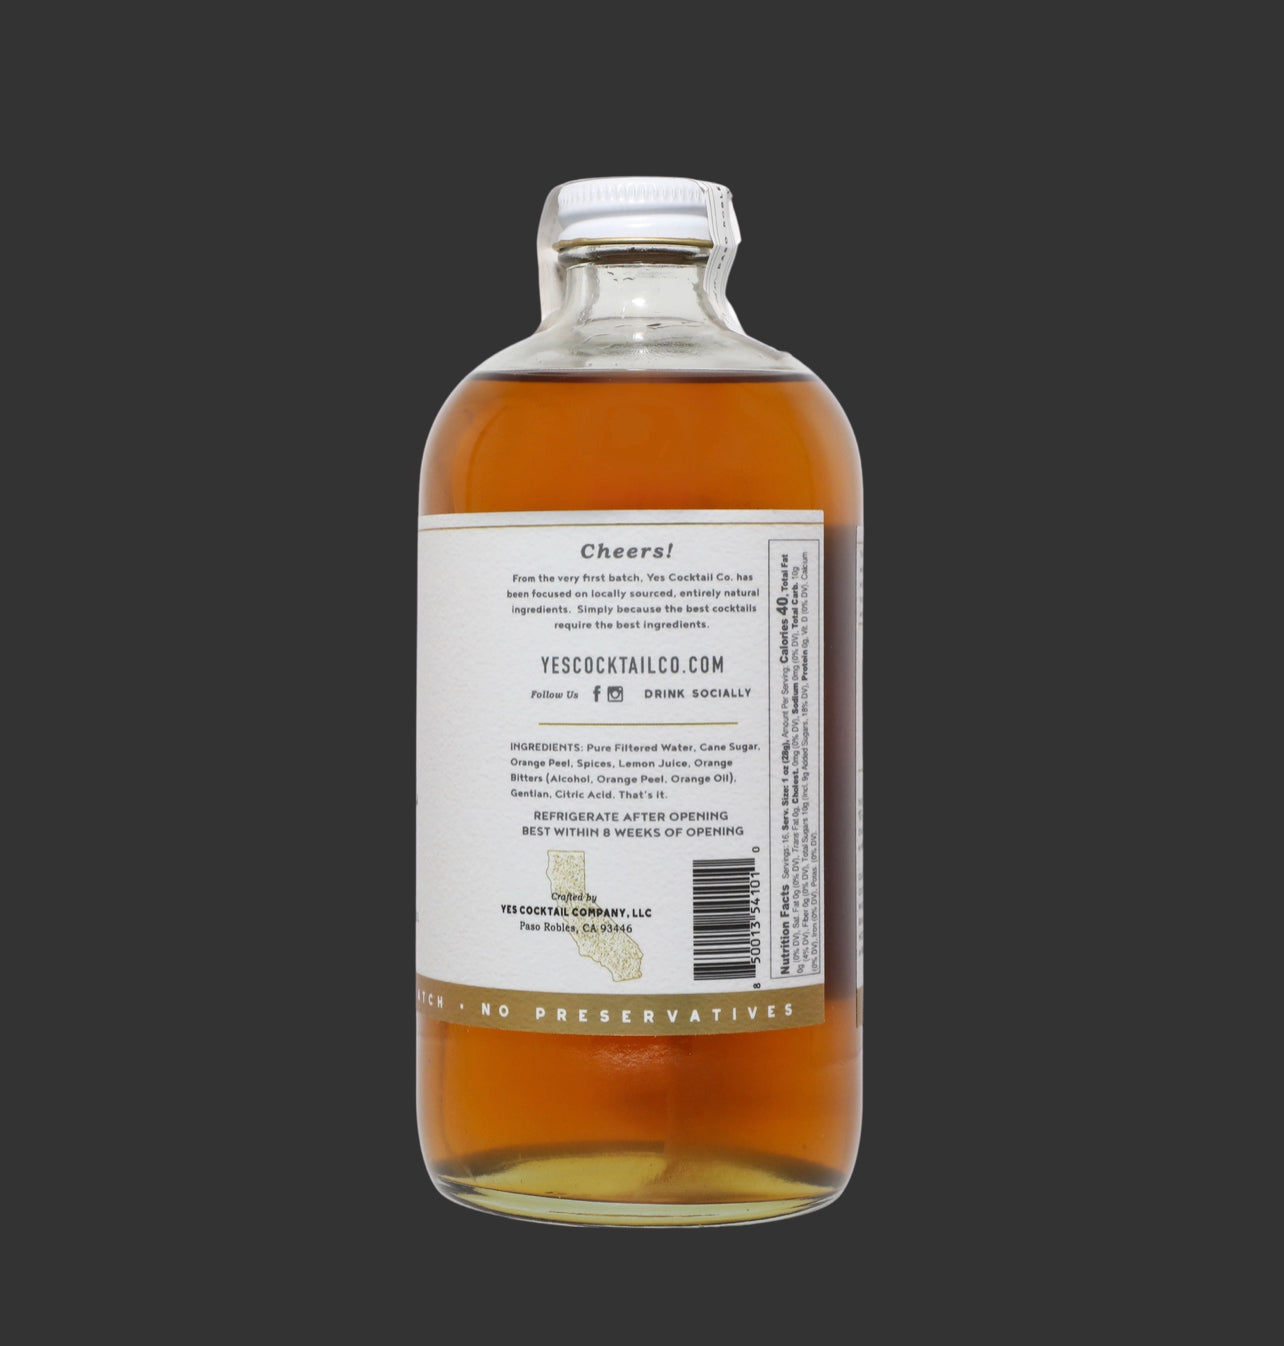 16 oz bottle of handcrafted Orange Peel and Bitters Cocktail Mixer by Yes Cocktail Co with label displaying nutritional information